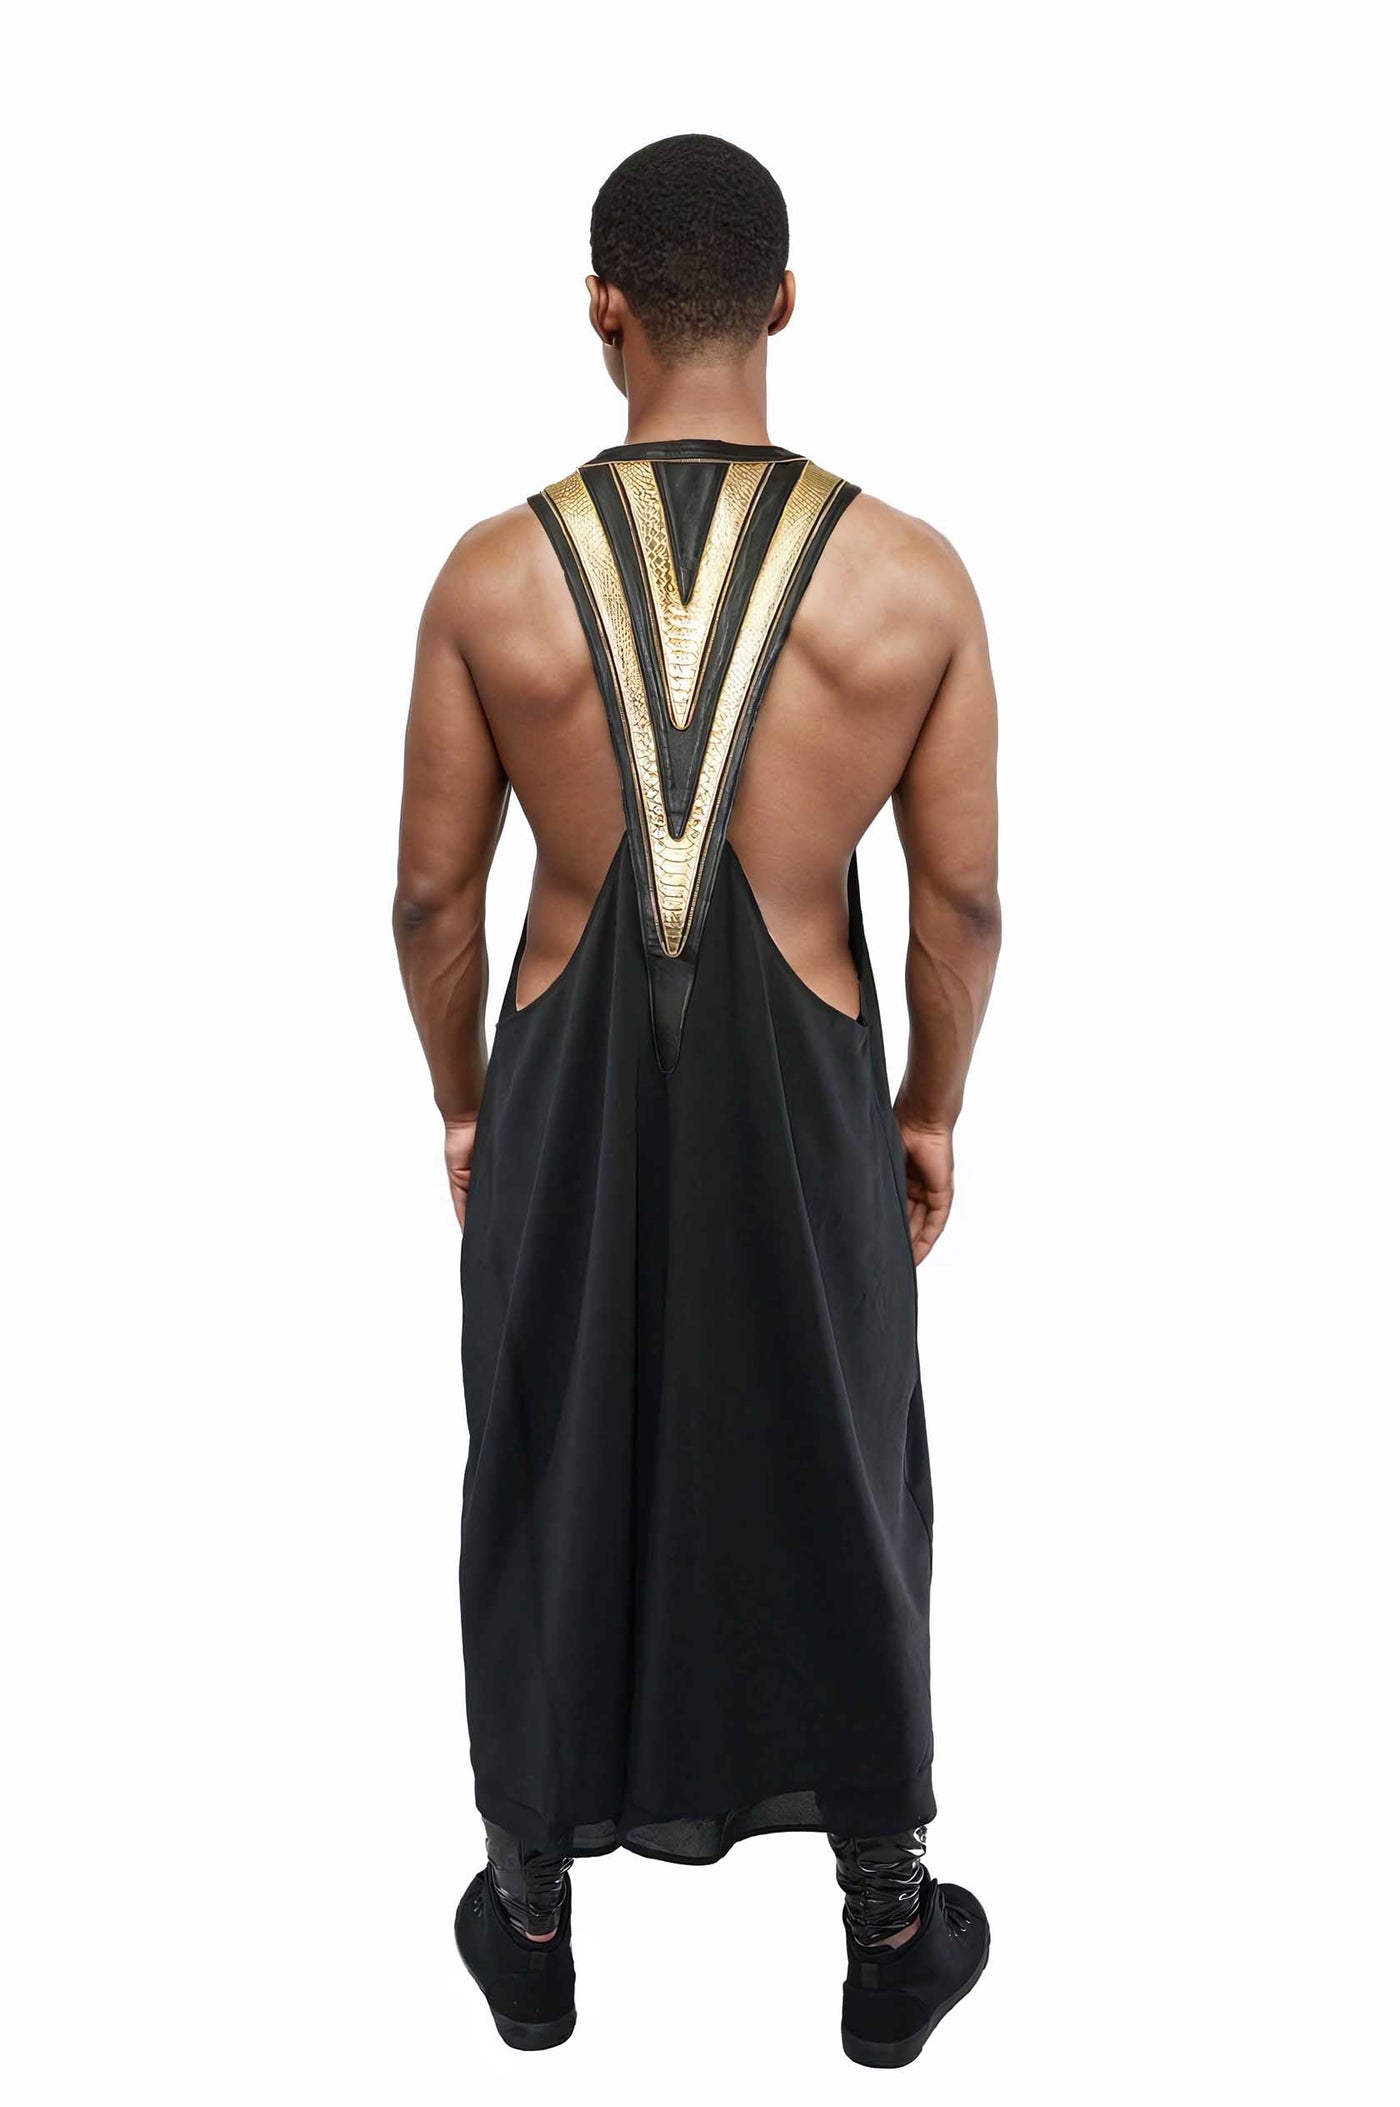 man wearing a black and gold kimono vest from Love Khaos